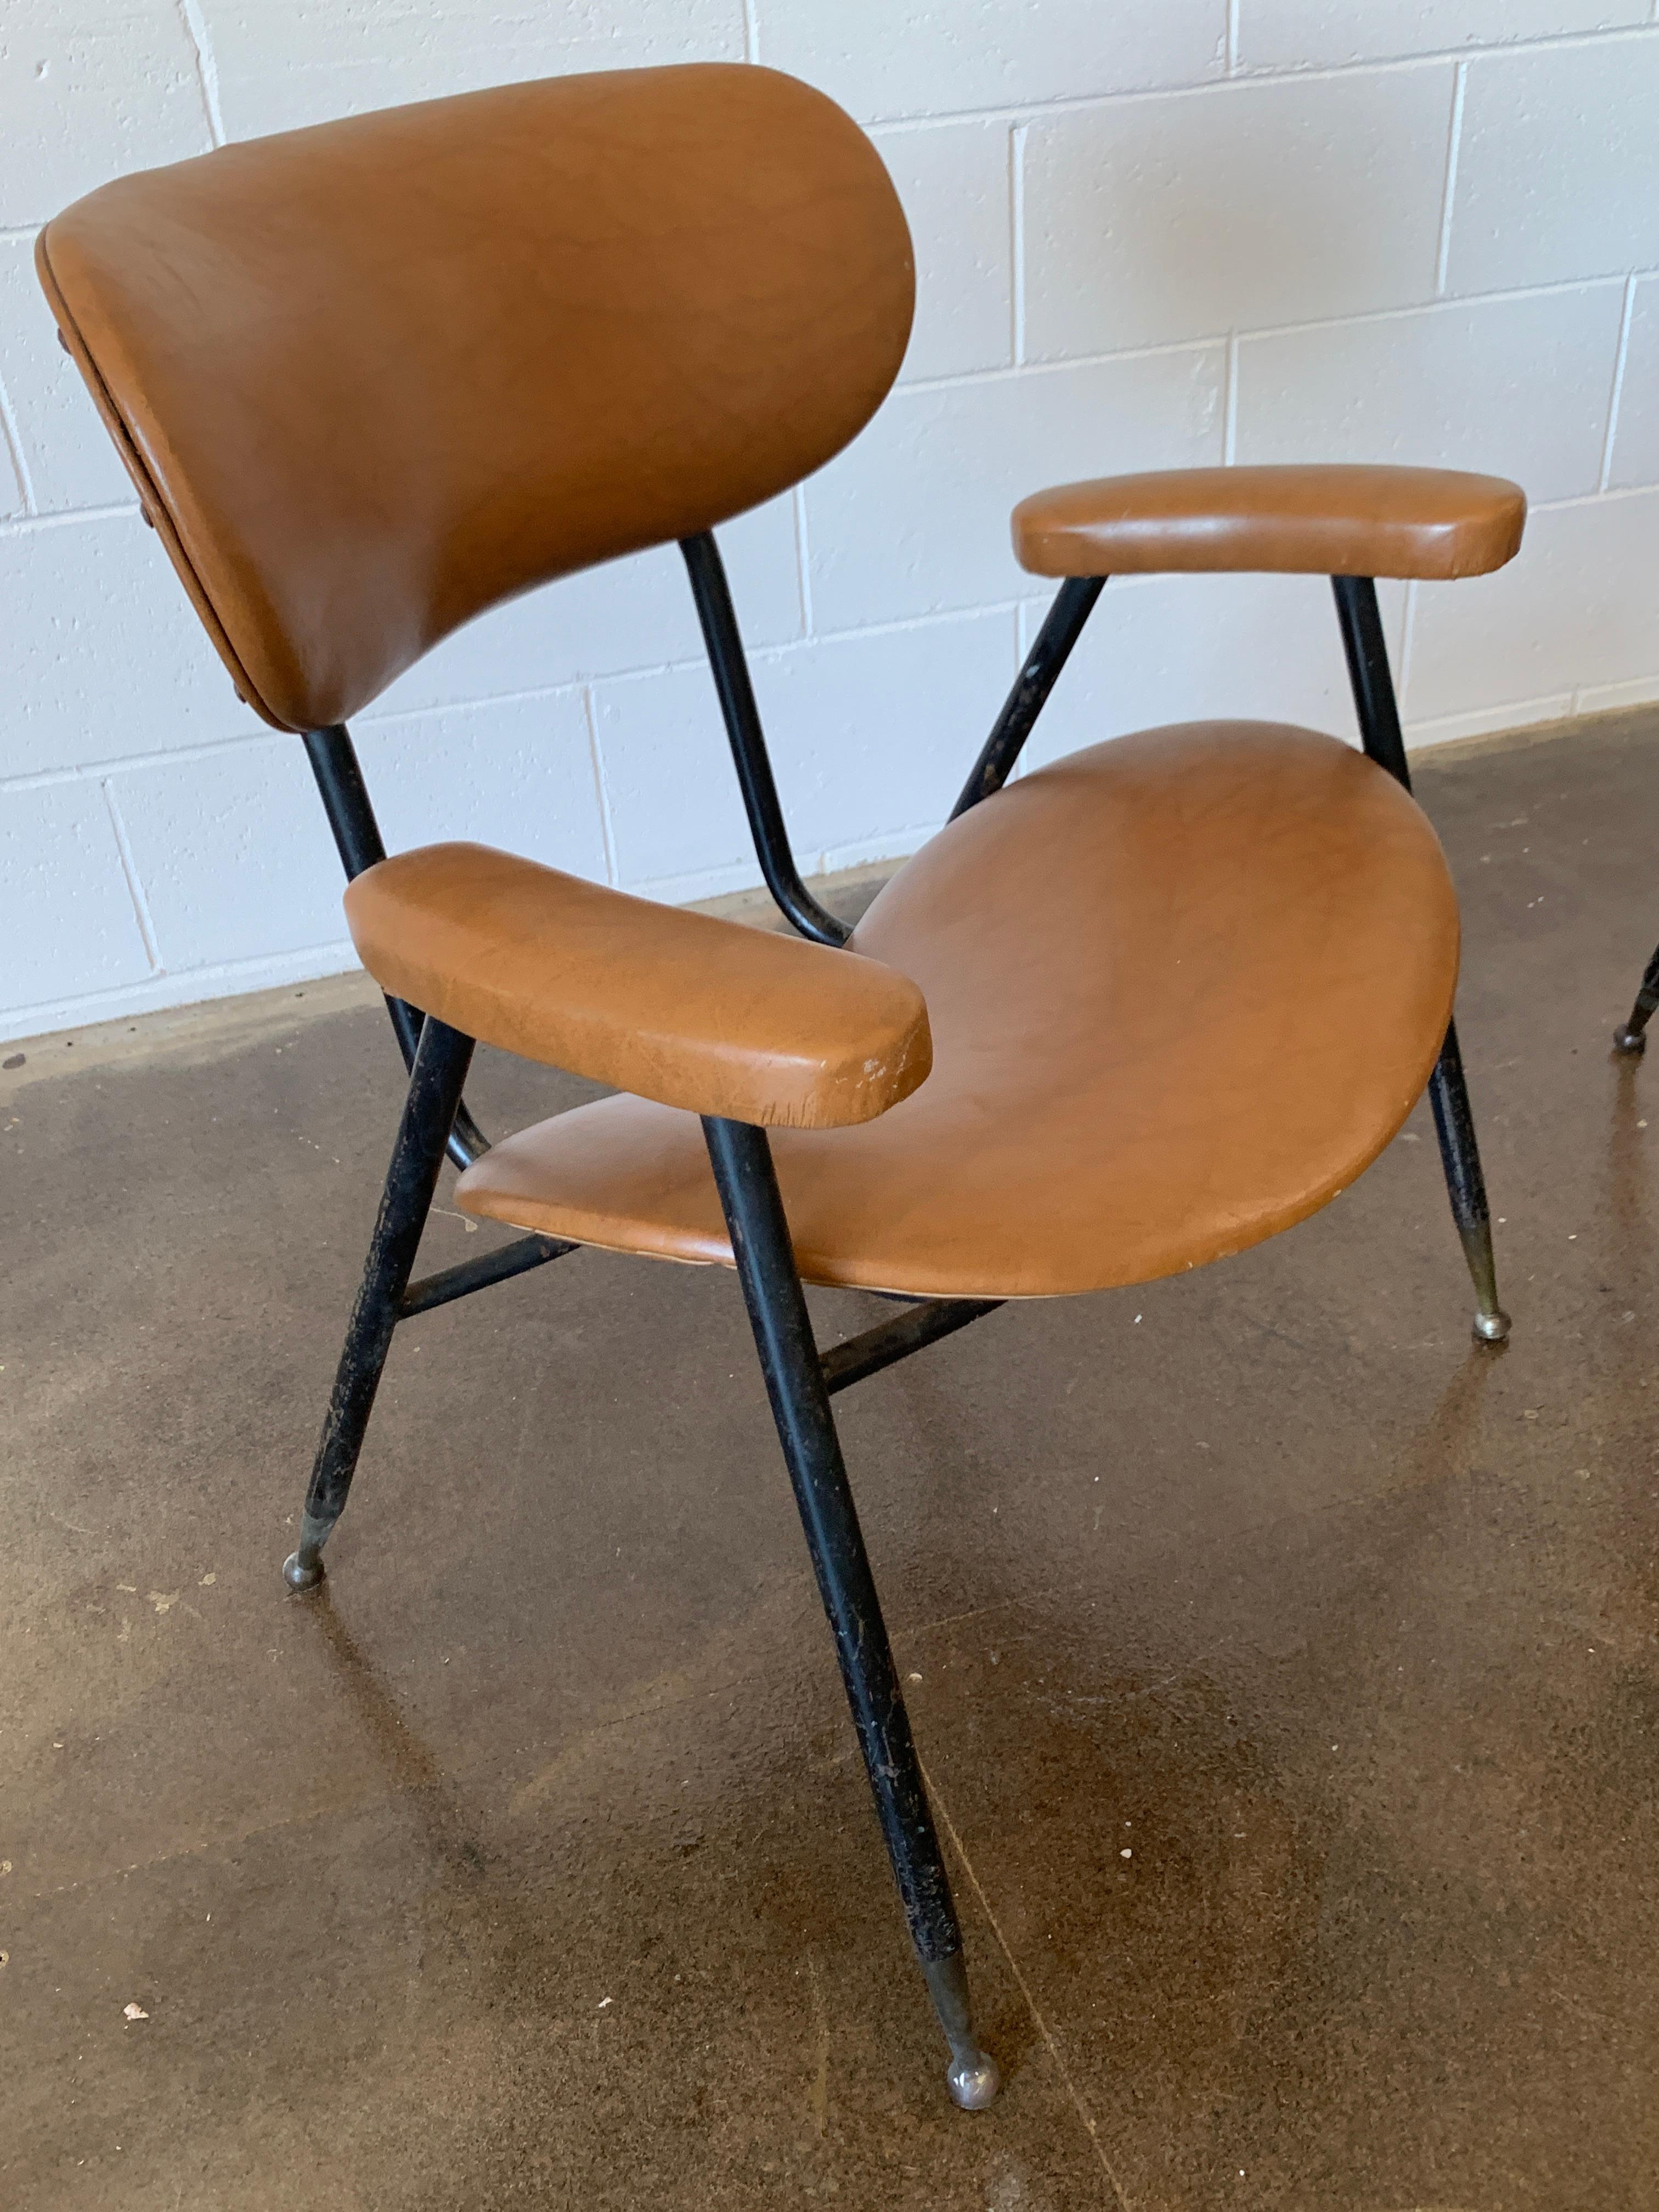 Two Italian Faux Leather Chairs by Gastone Rinaldi for RIMA 1960s  For Sale 5